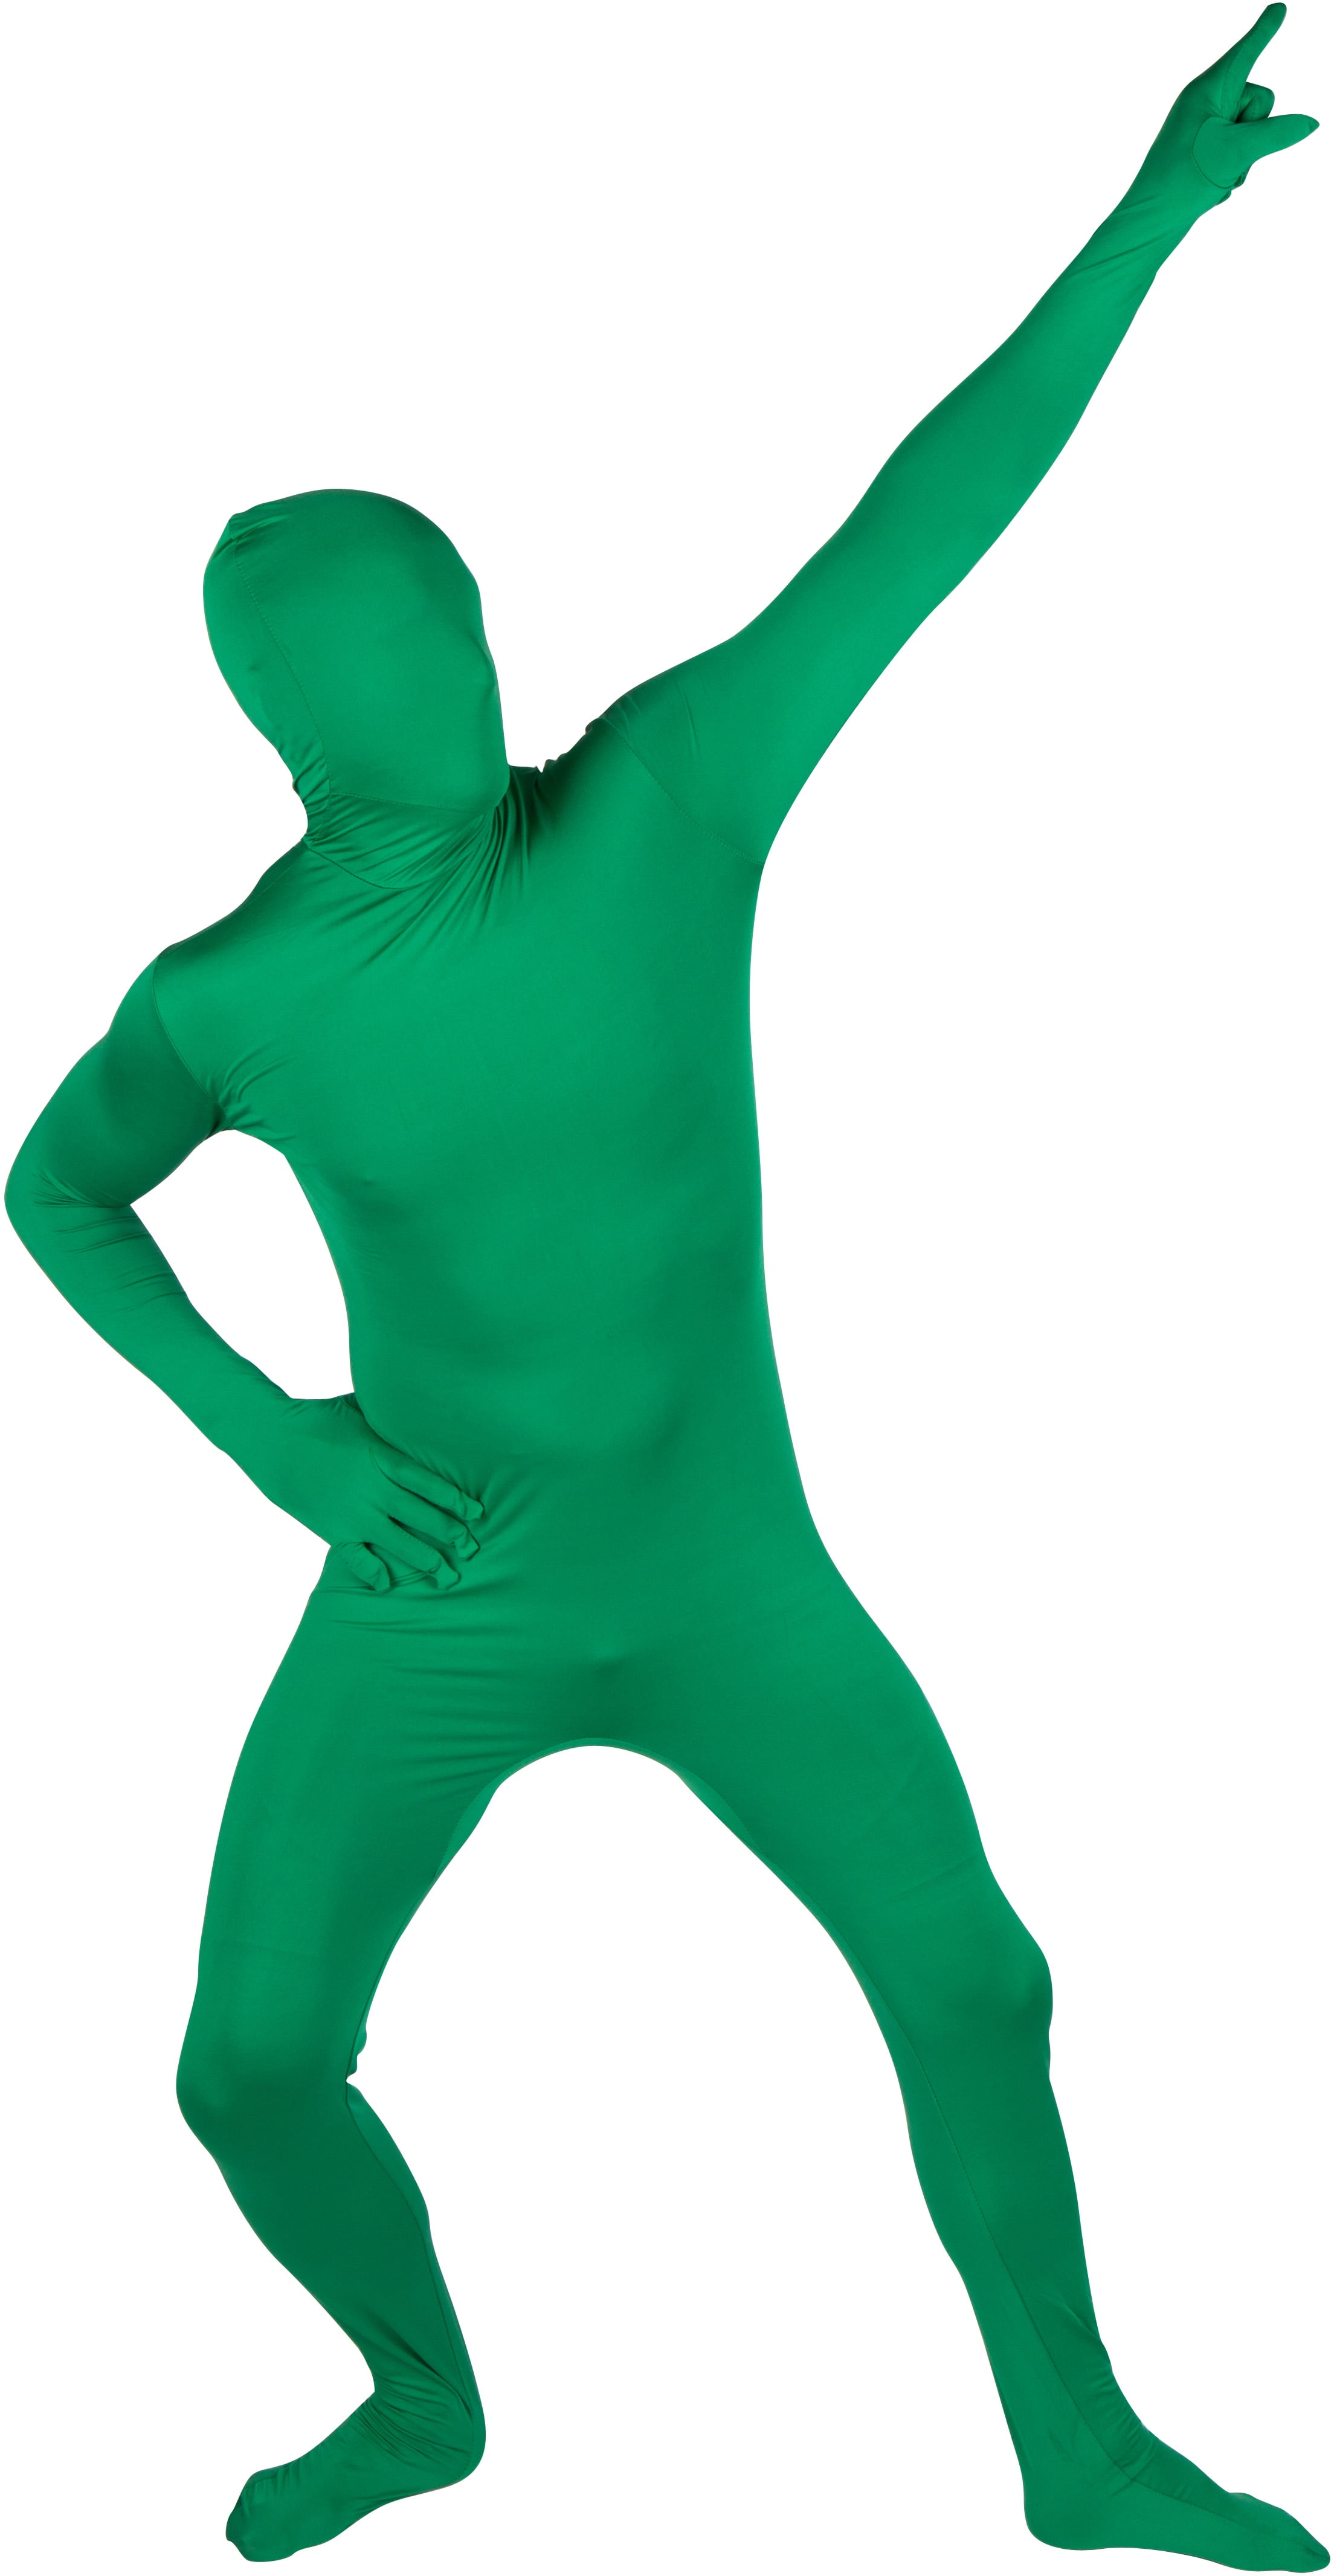 Adult Spandex Second Skin Full Bodysuit Costume by Capital Costumes (Green)